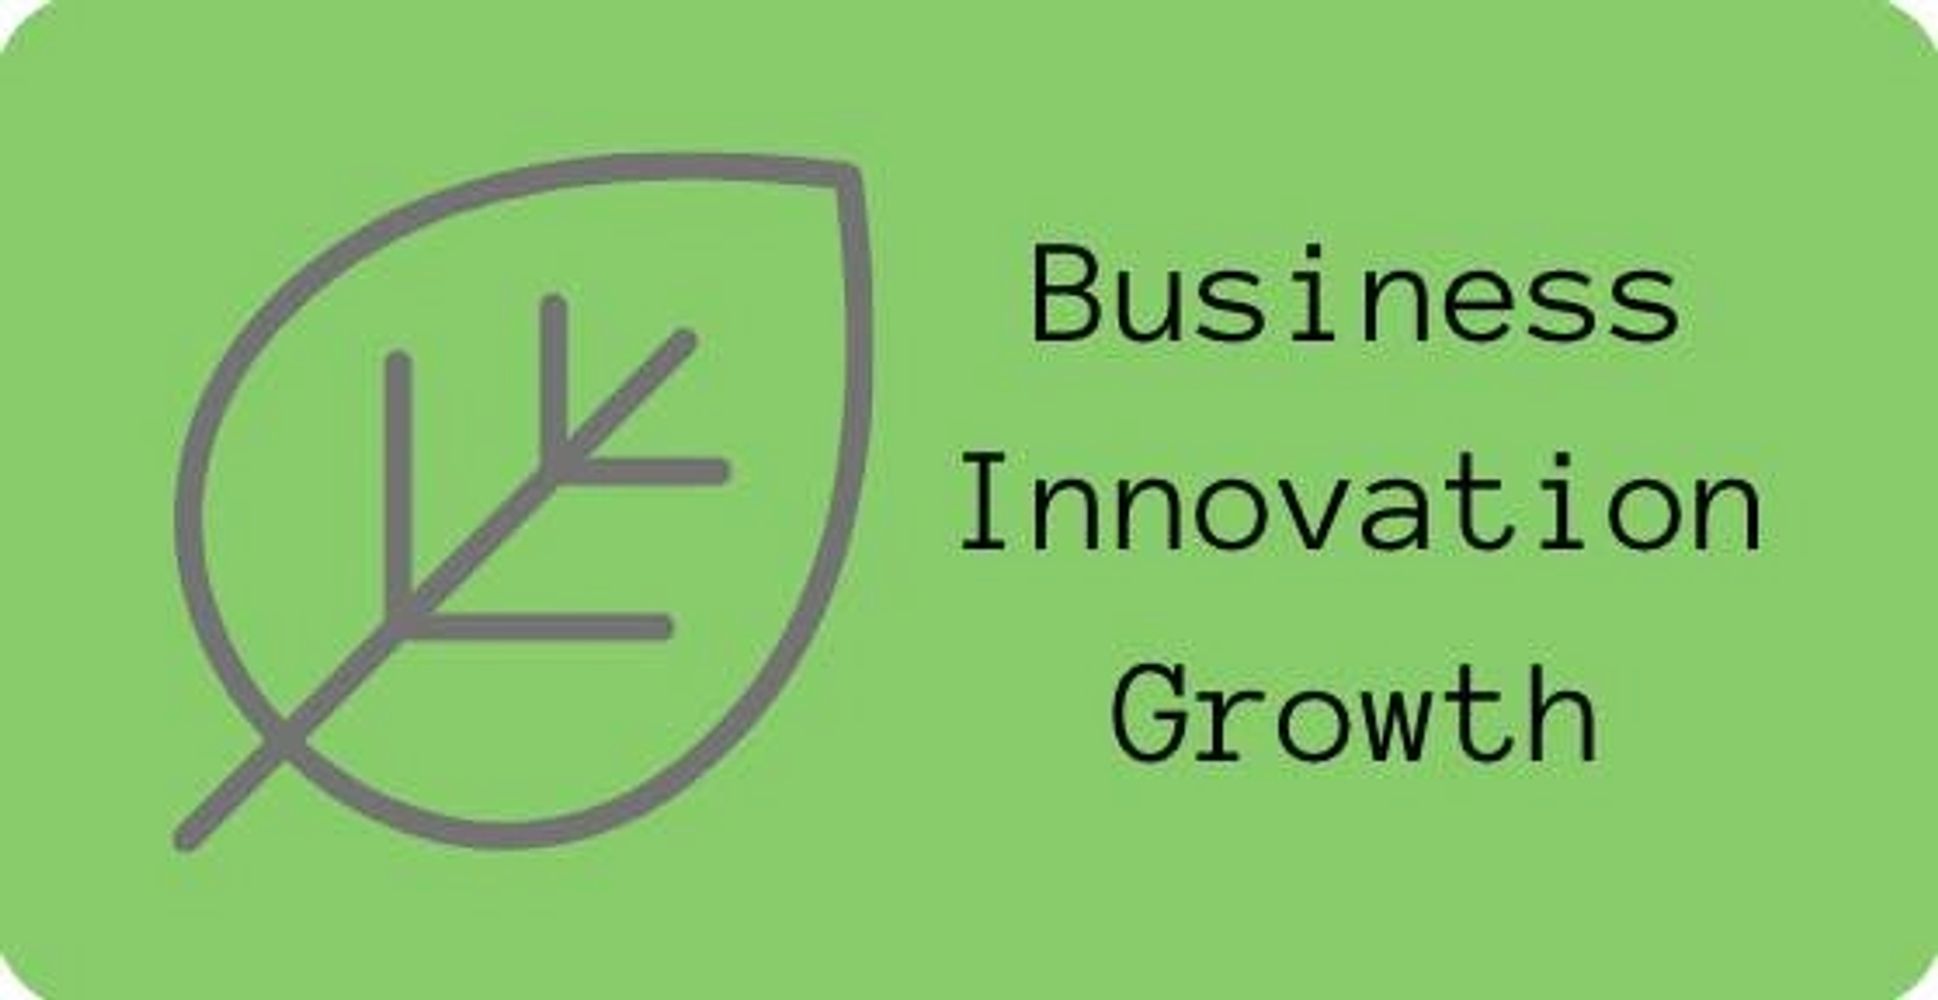 Business Innovation Growth logo with leaf